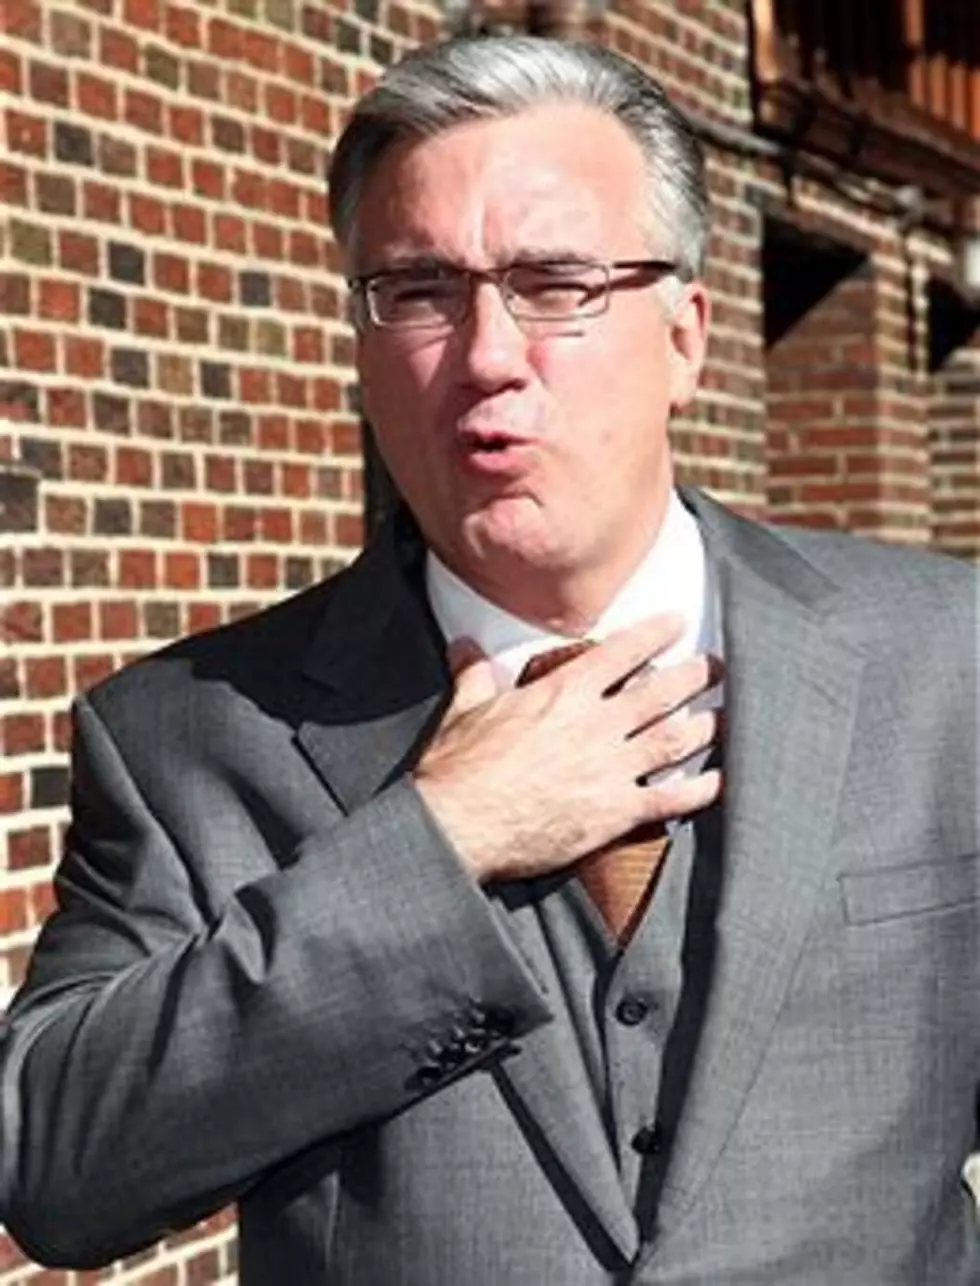 You Didn’t Think Keith Olbermann Was Gone For Good, Did You?